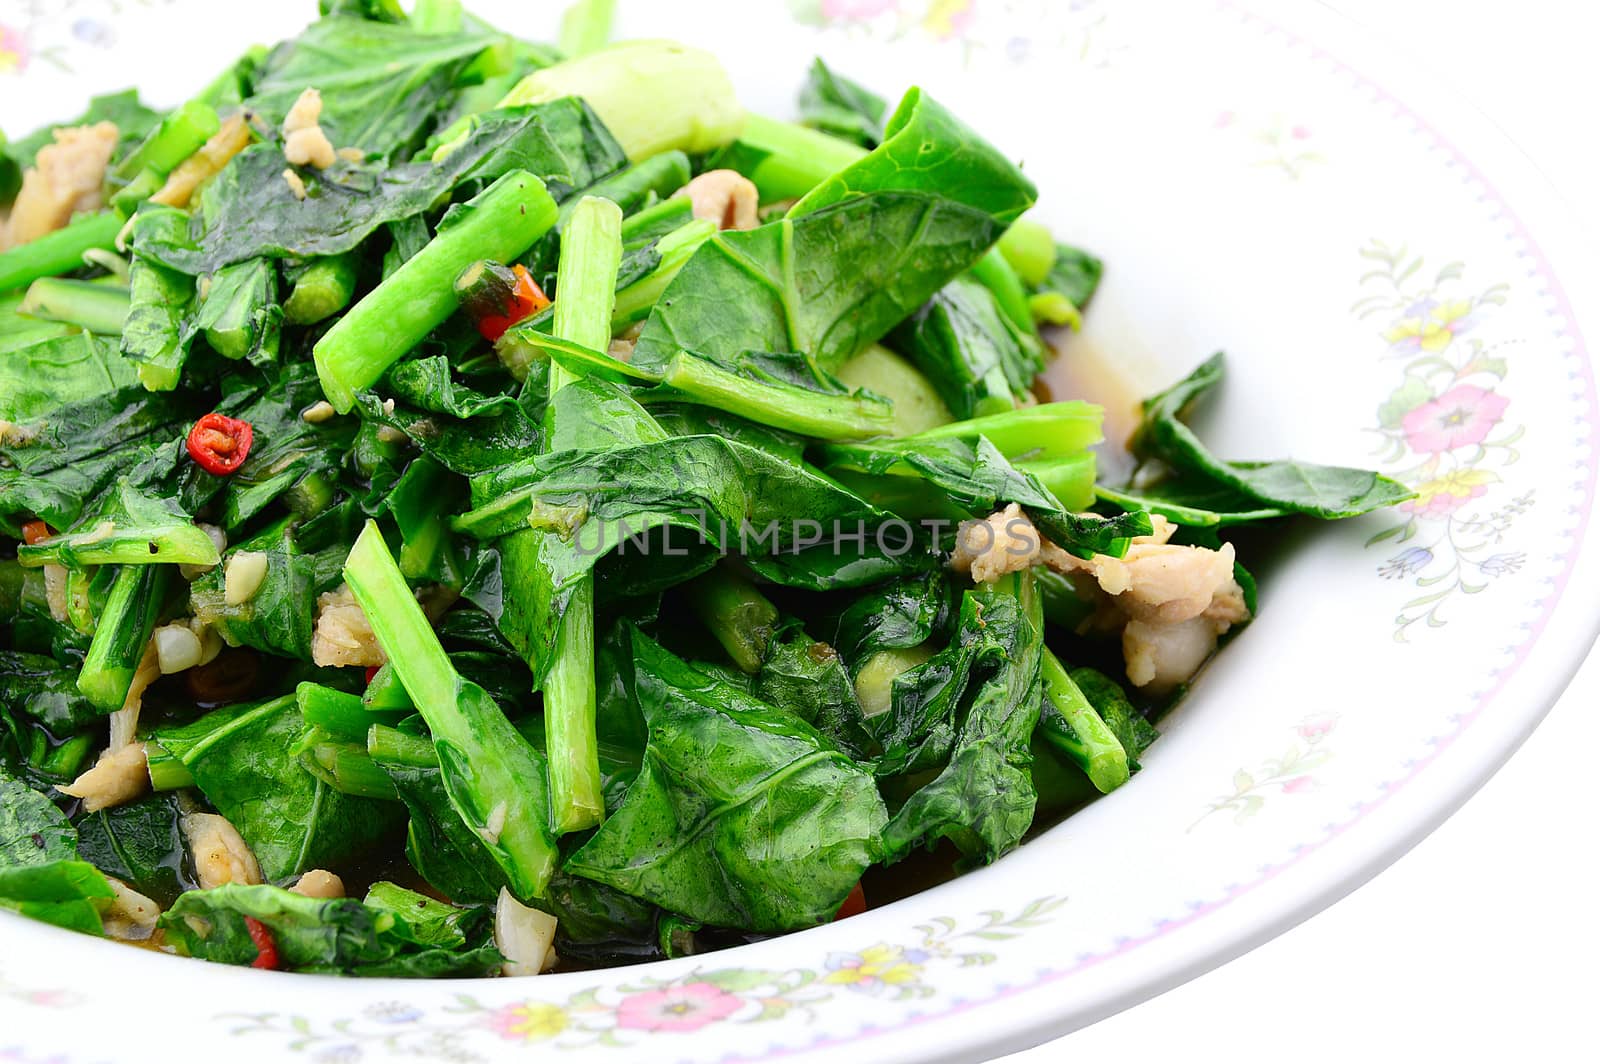 Stir fried of Chianease kale vegetables with pork by Lekchangply